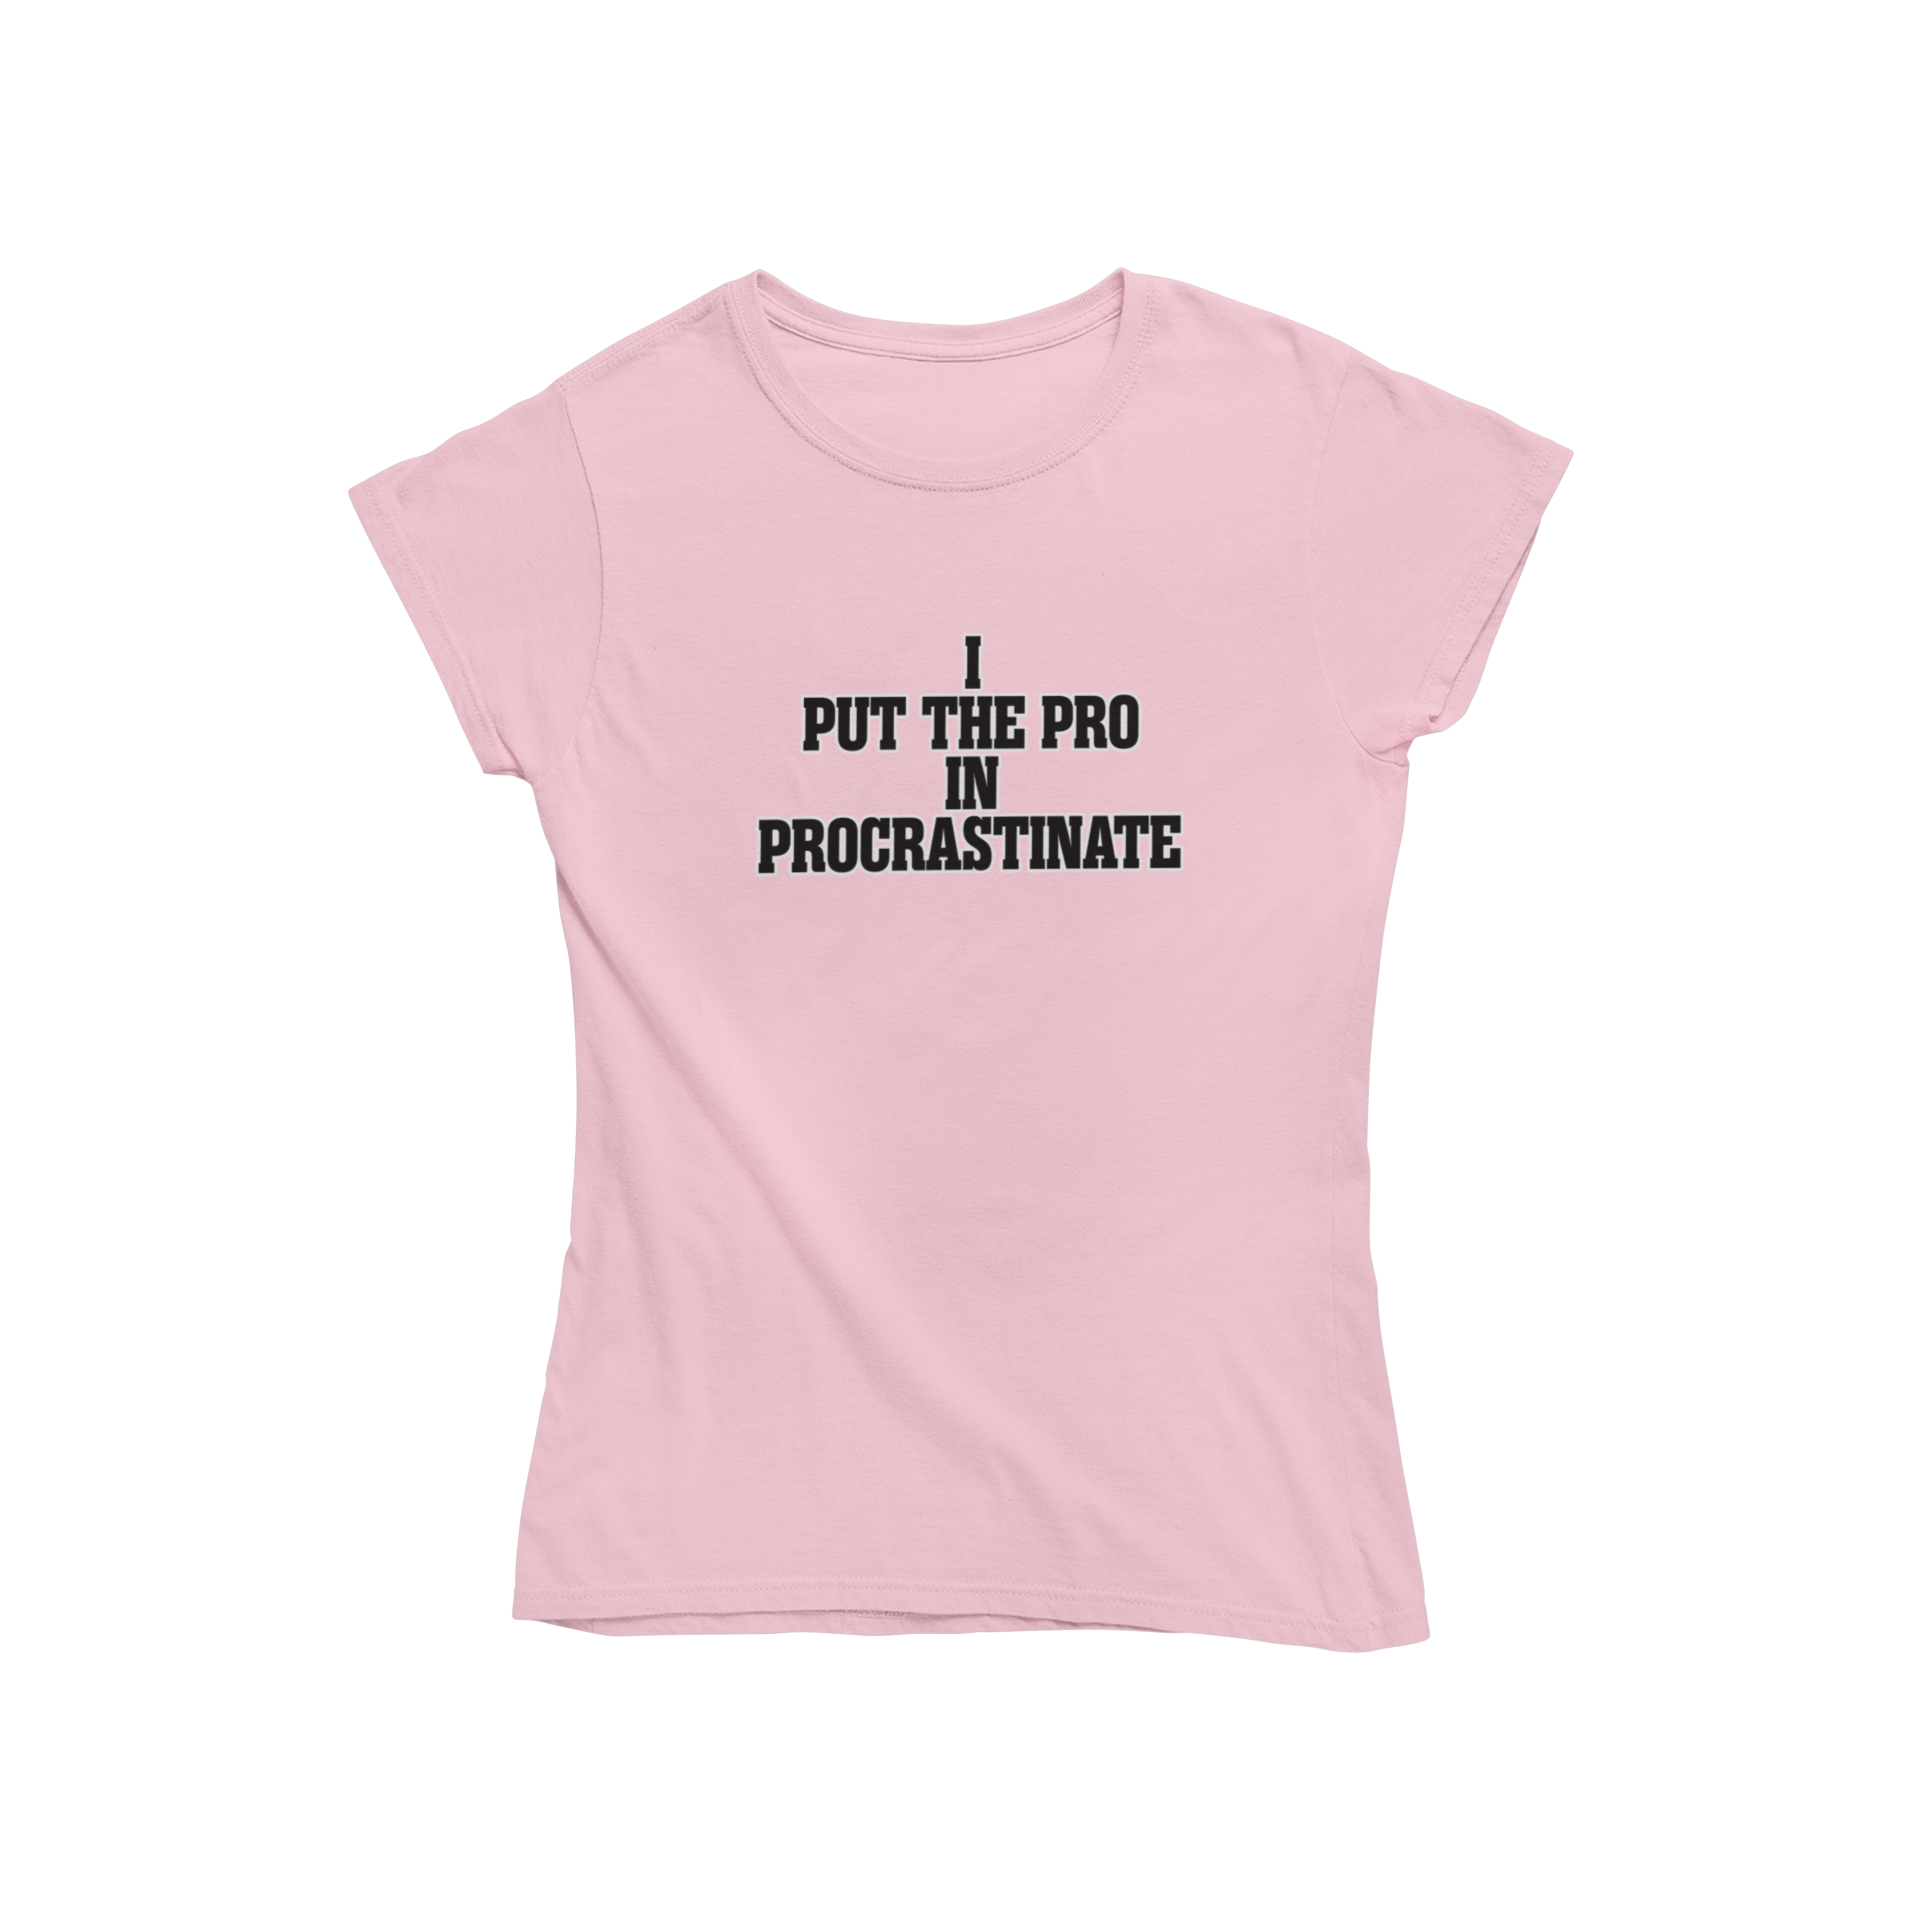 Introducing our Procrastinate Womens T-shirt! With a fitted design and sassy slogan, this shirt is perfect for any woman who knows how to put the "pro" in procrastinate. Express your unique style while showing off your sense of humor. Don't wait, grab yours now!